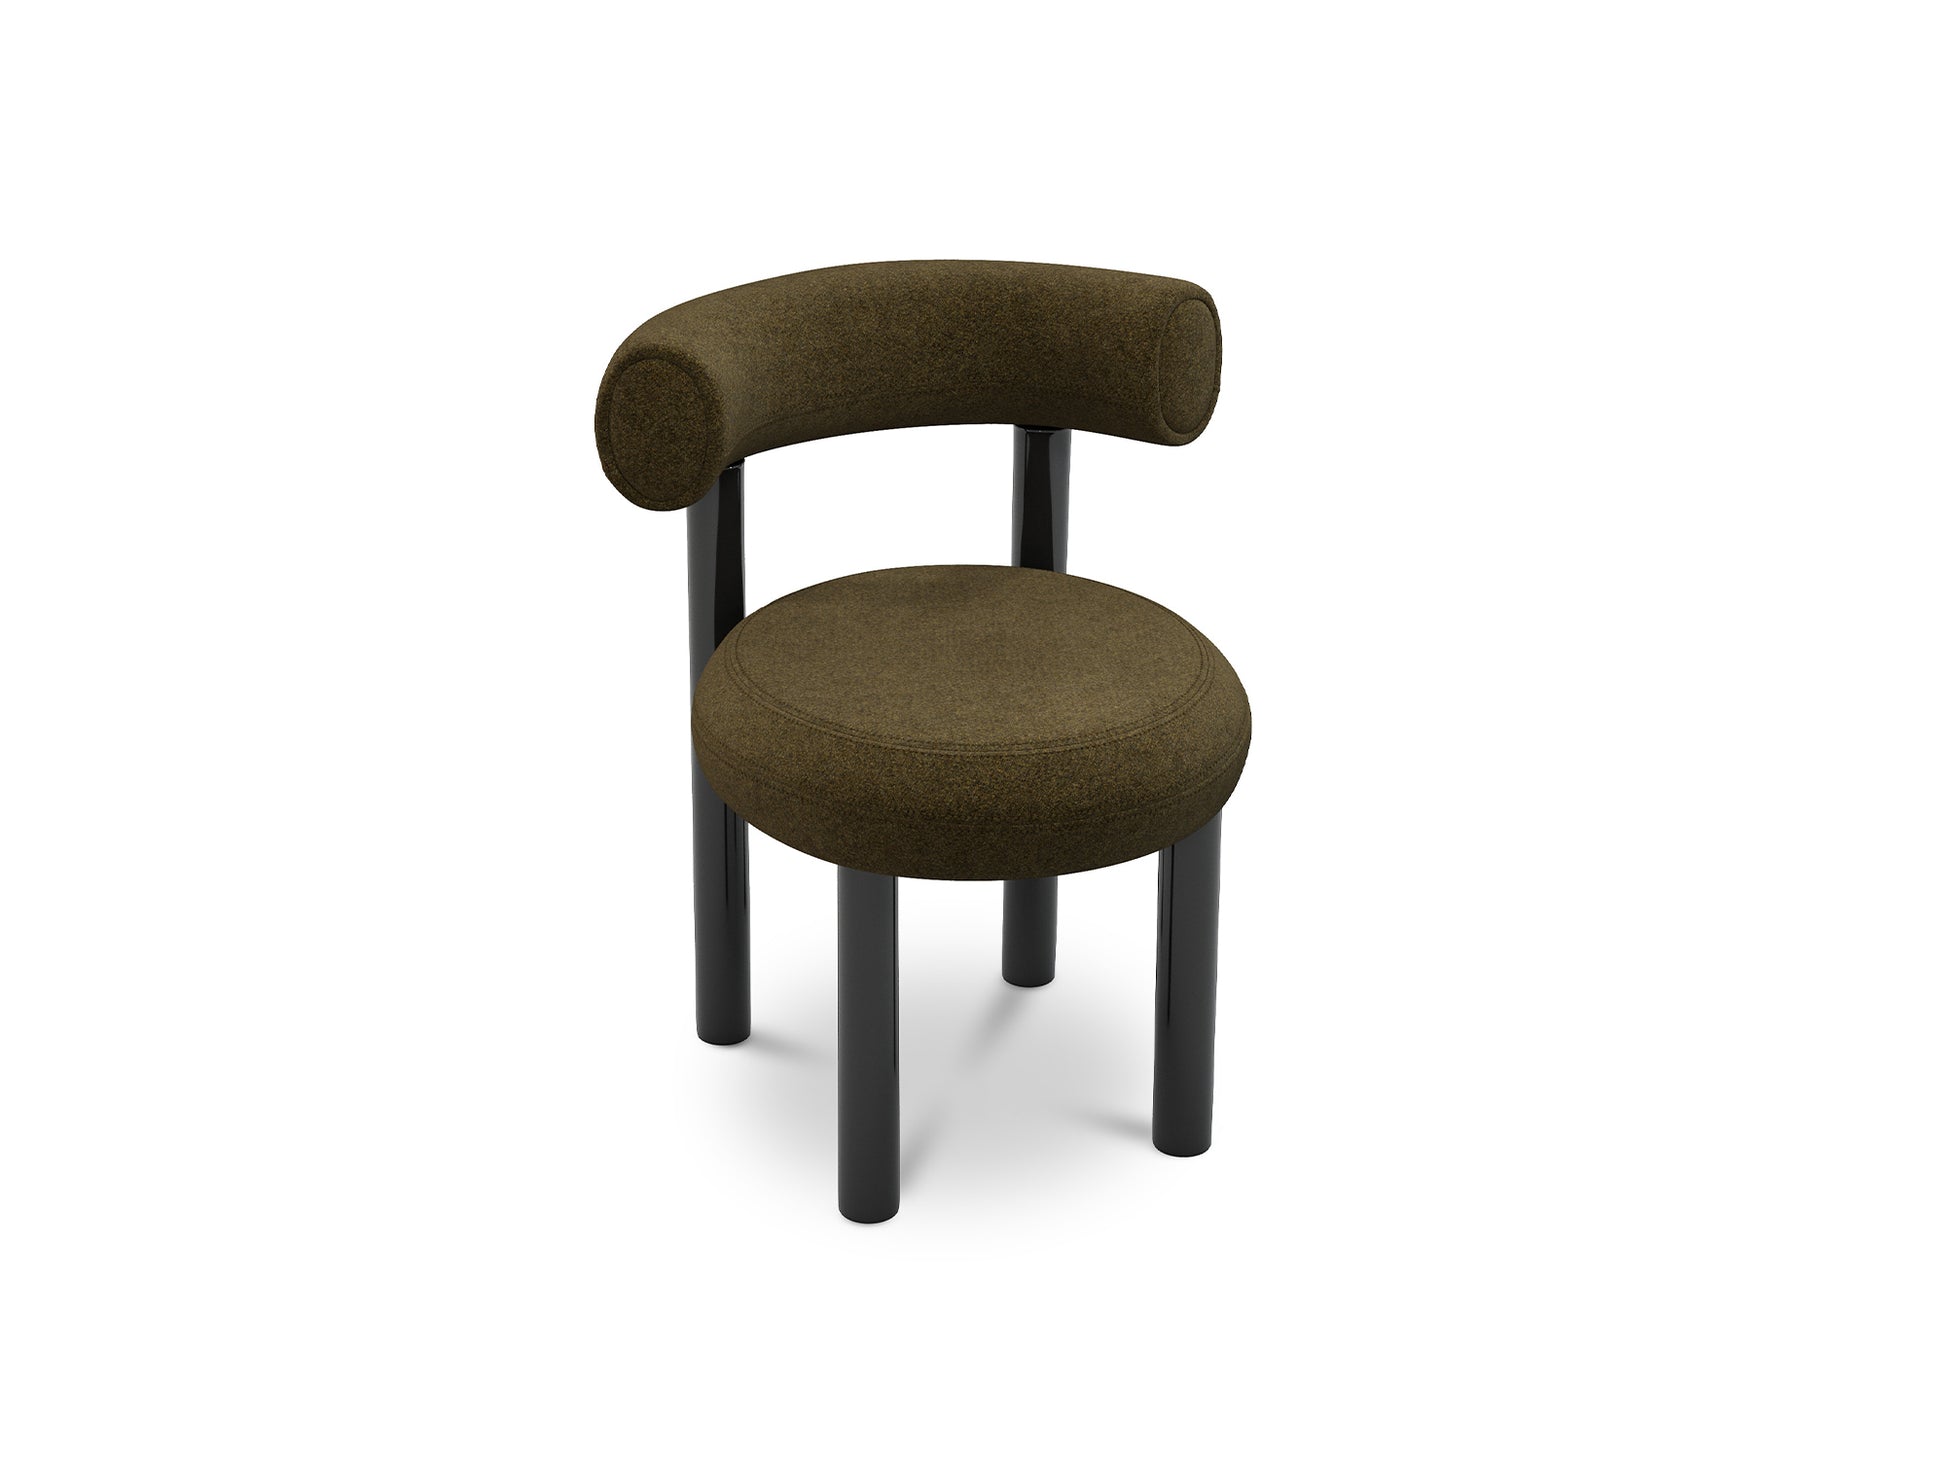 Fat Dining Chair by Tom Dixon - Melange Nap 491